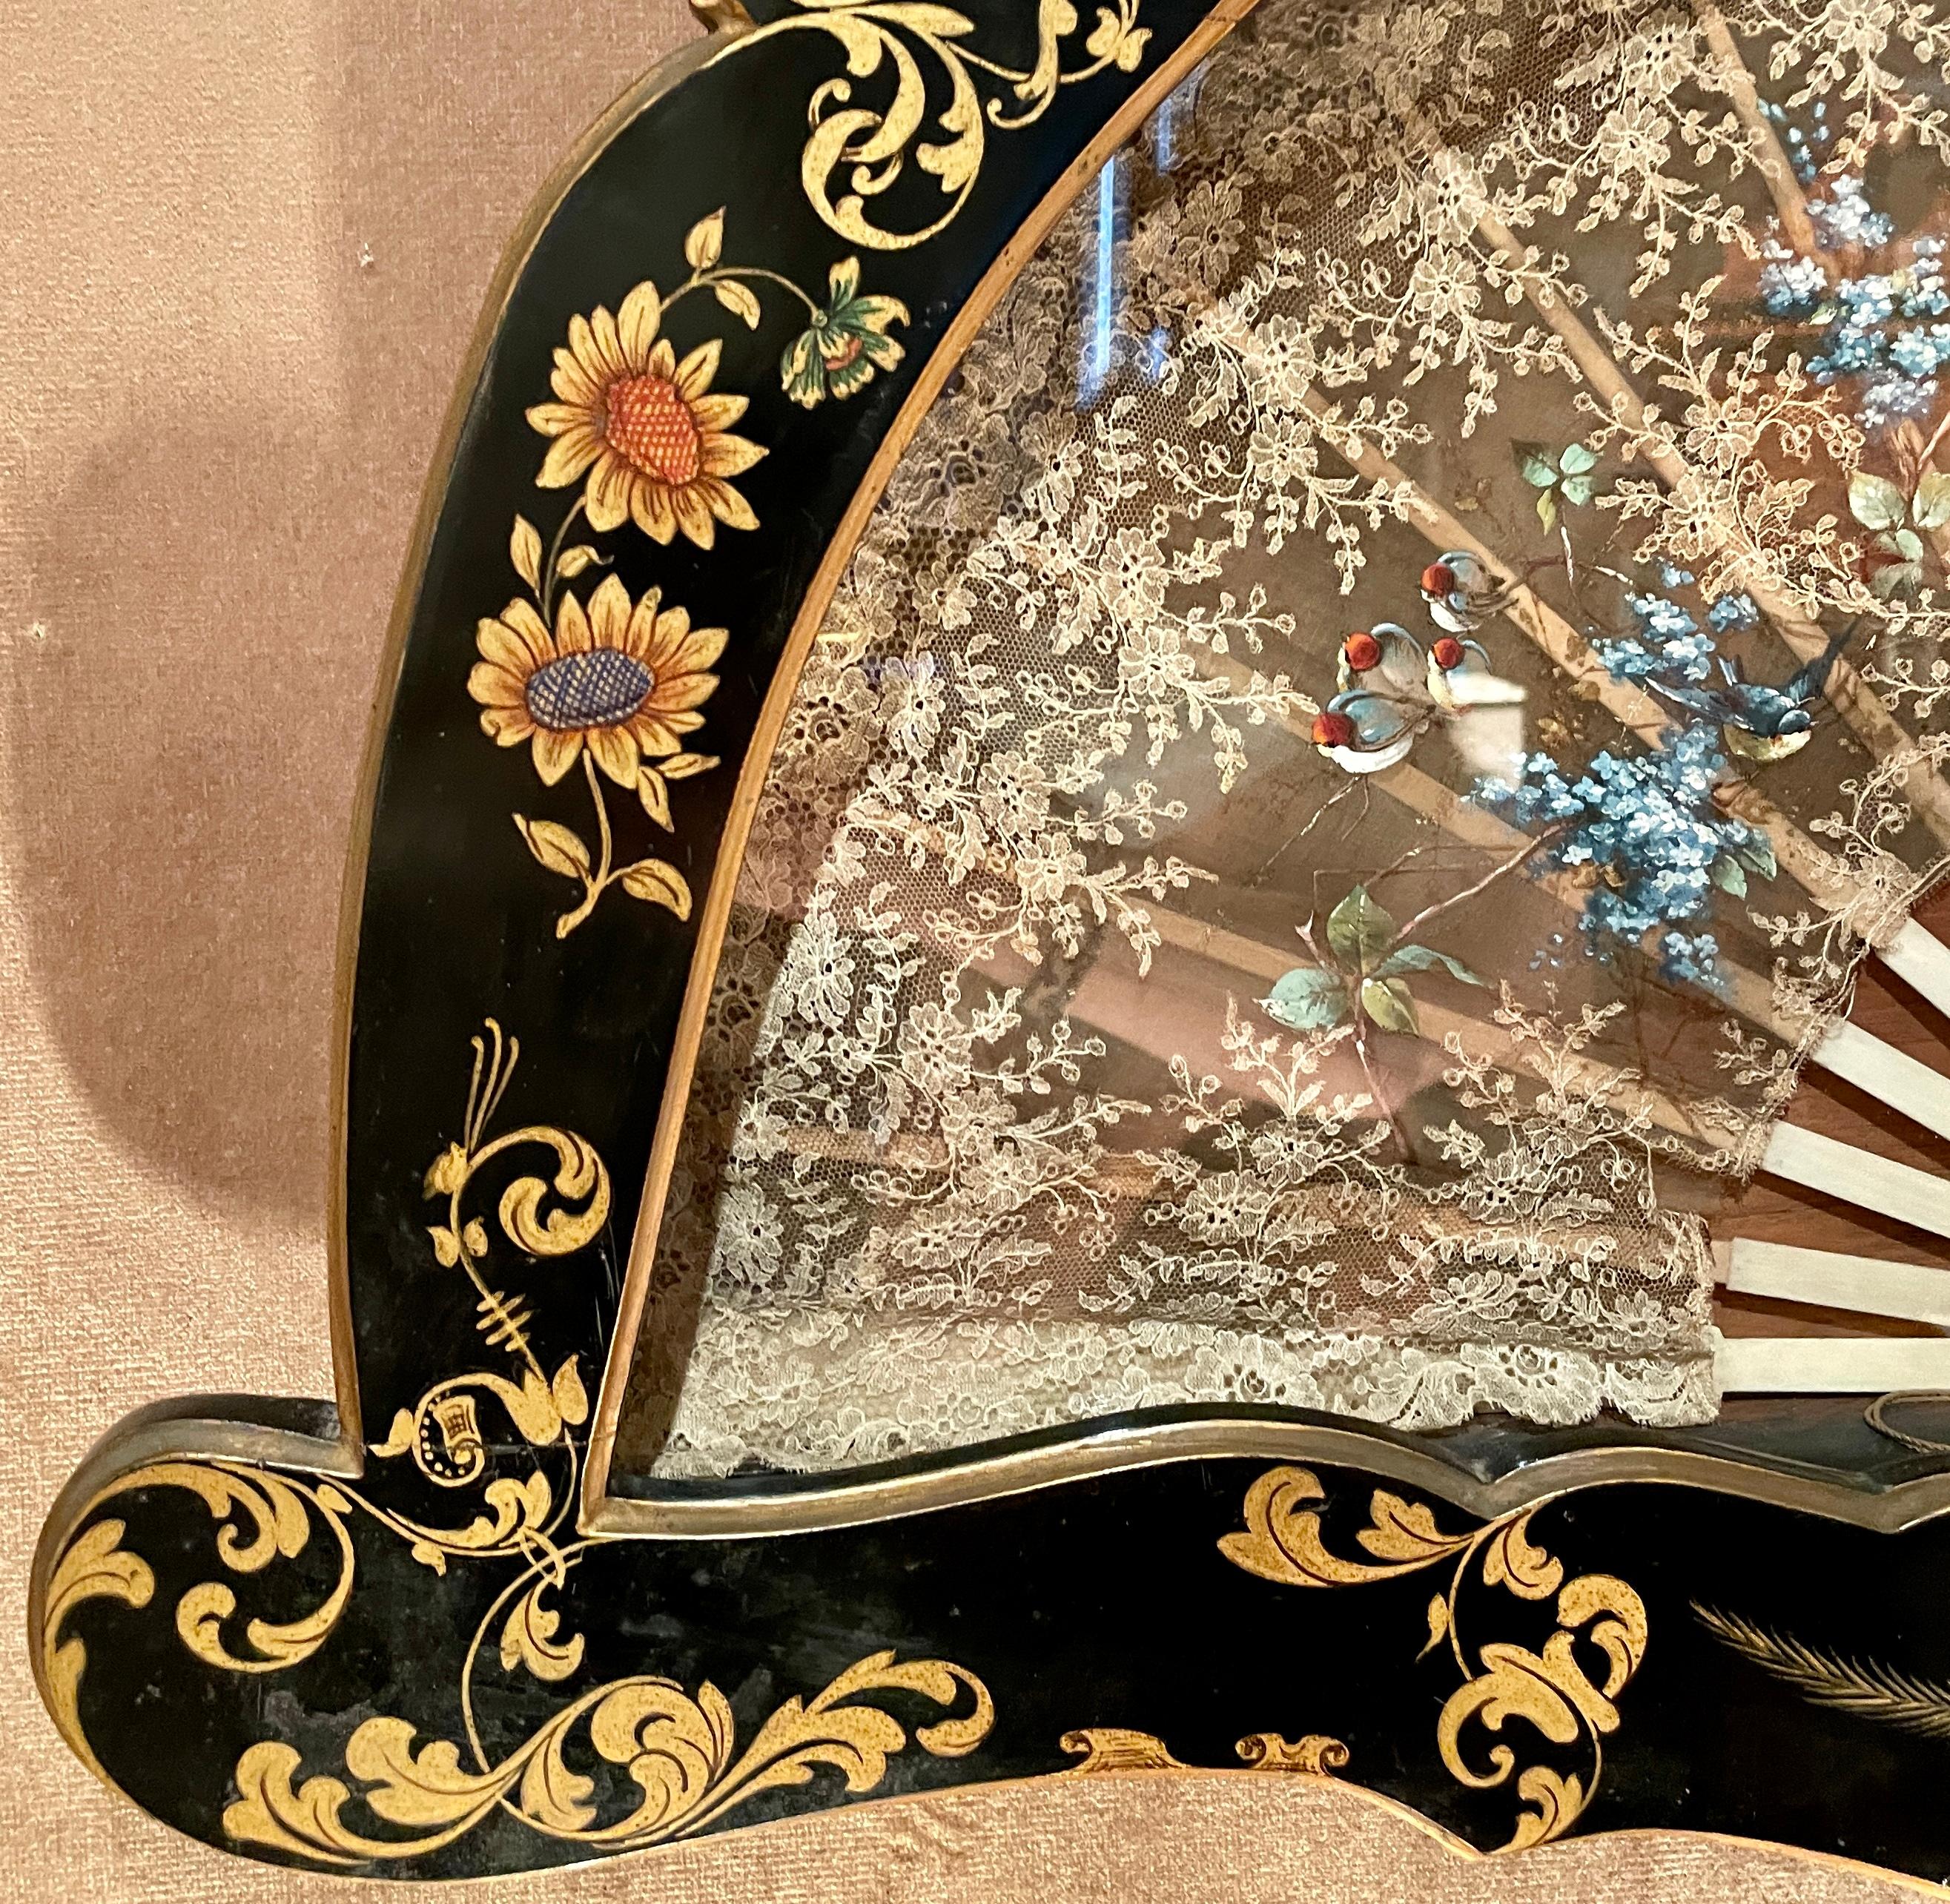 Antique 19th century Chinoiserie hand-made fan in a lacquered frame, circa 1870.